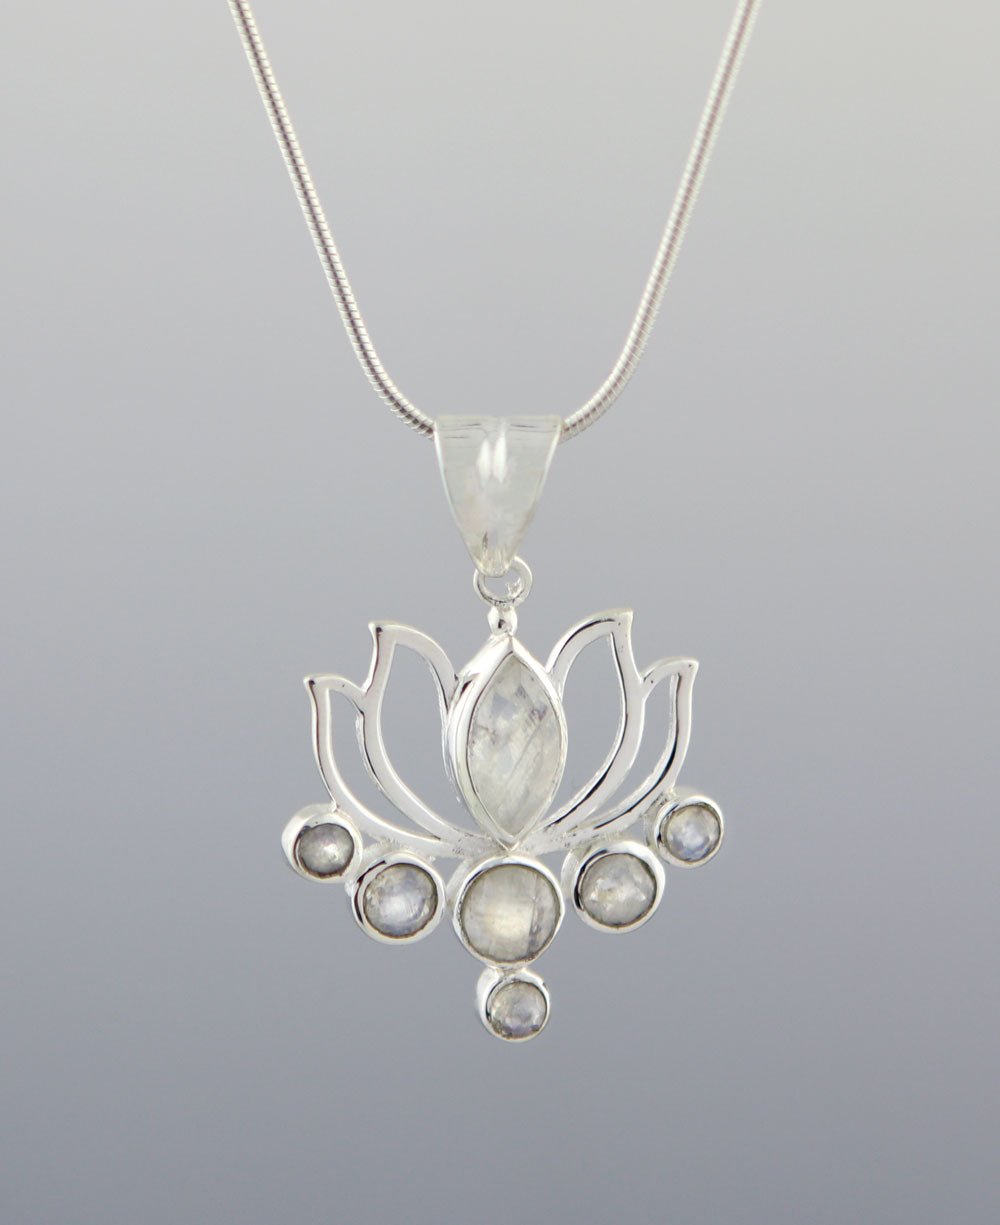 Moonstone Pendant in Lotus Design, Sterling Silver - Charms & Pendants